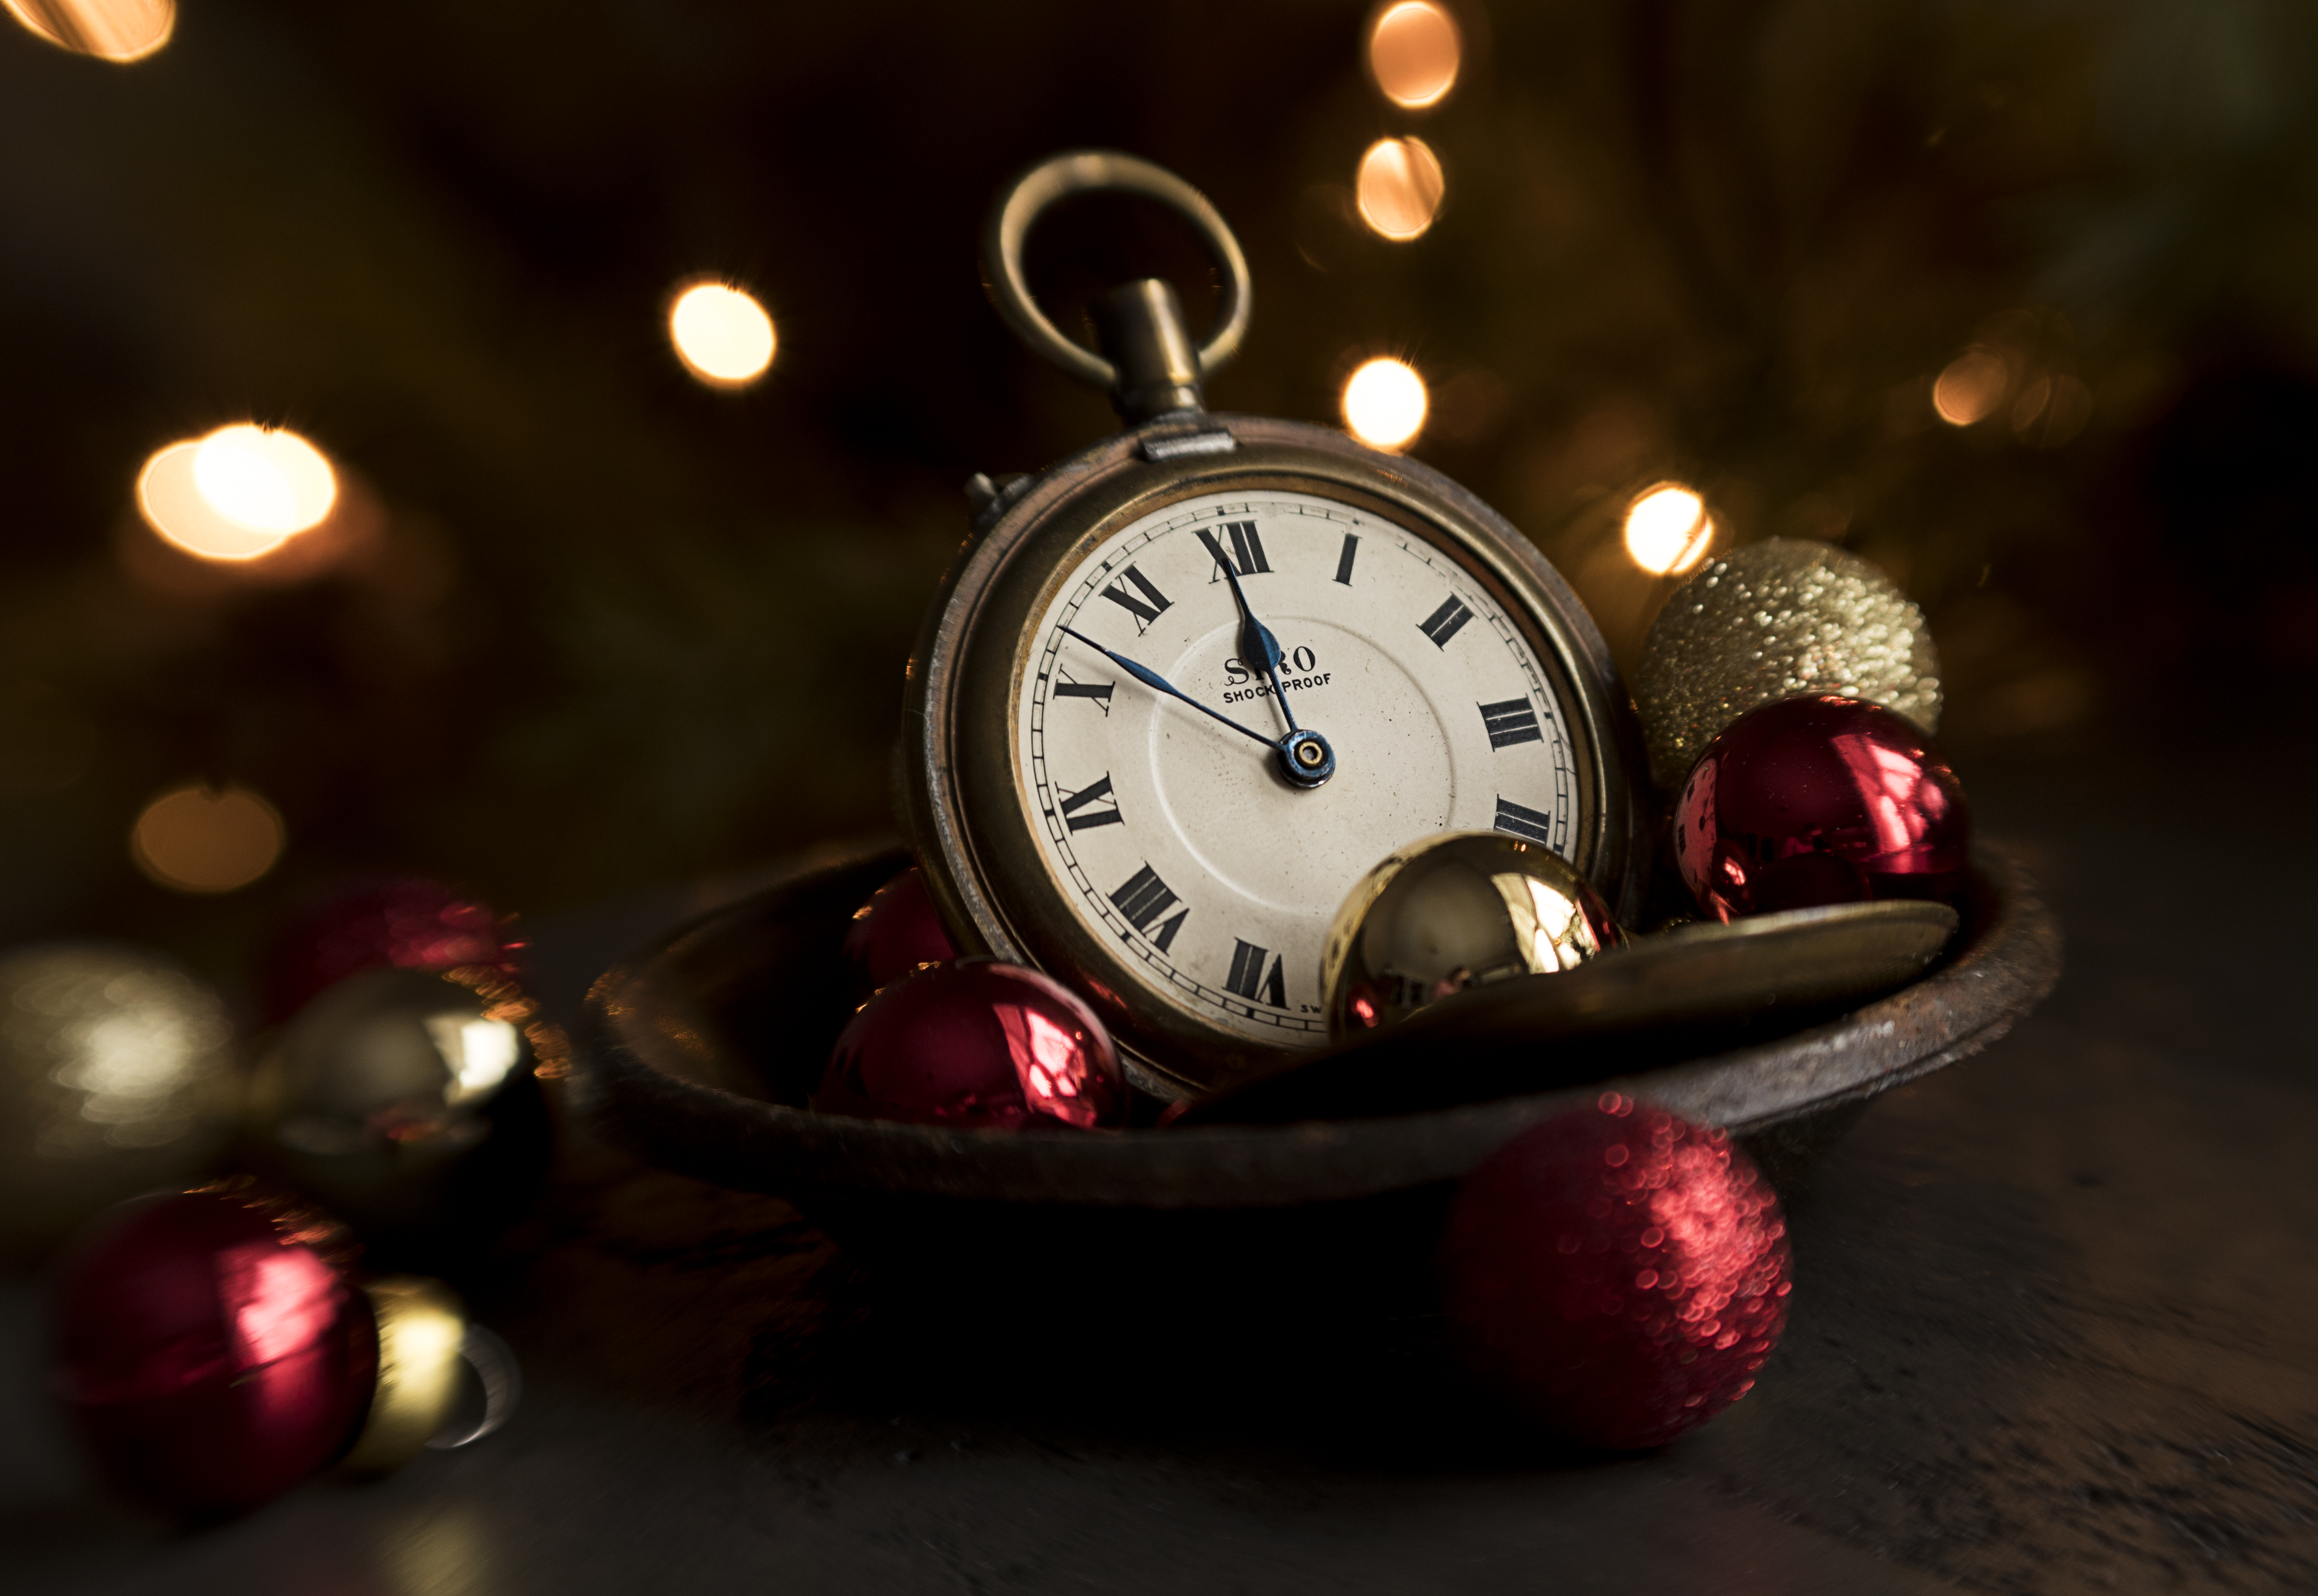 vintage, holidays, clock, new year, christmas, decorations, balls wallpaper for mobile